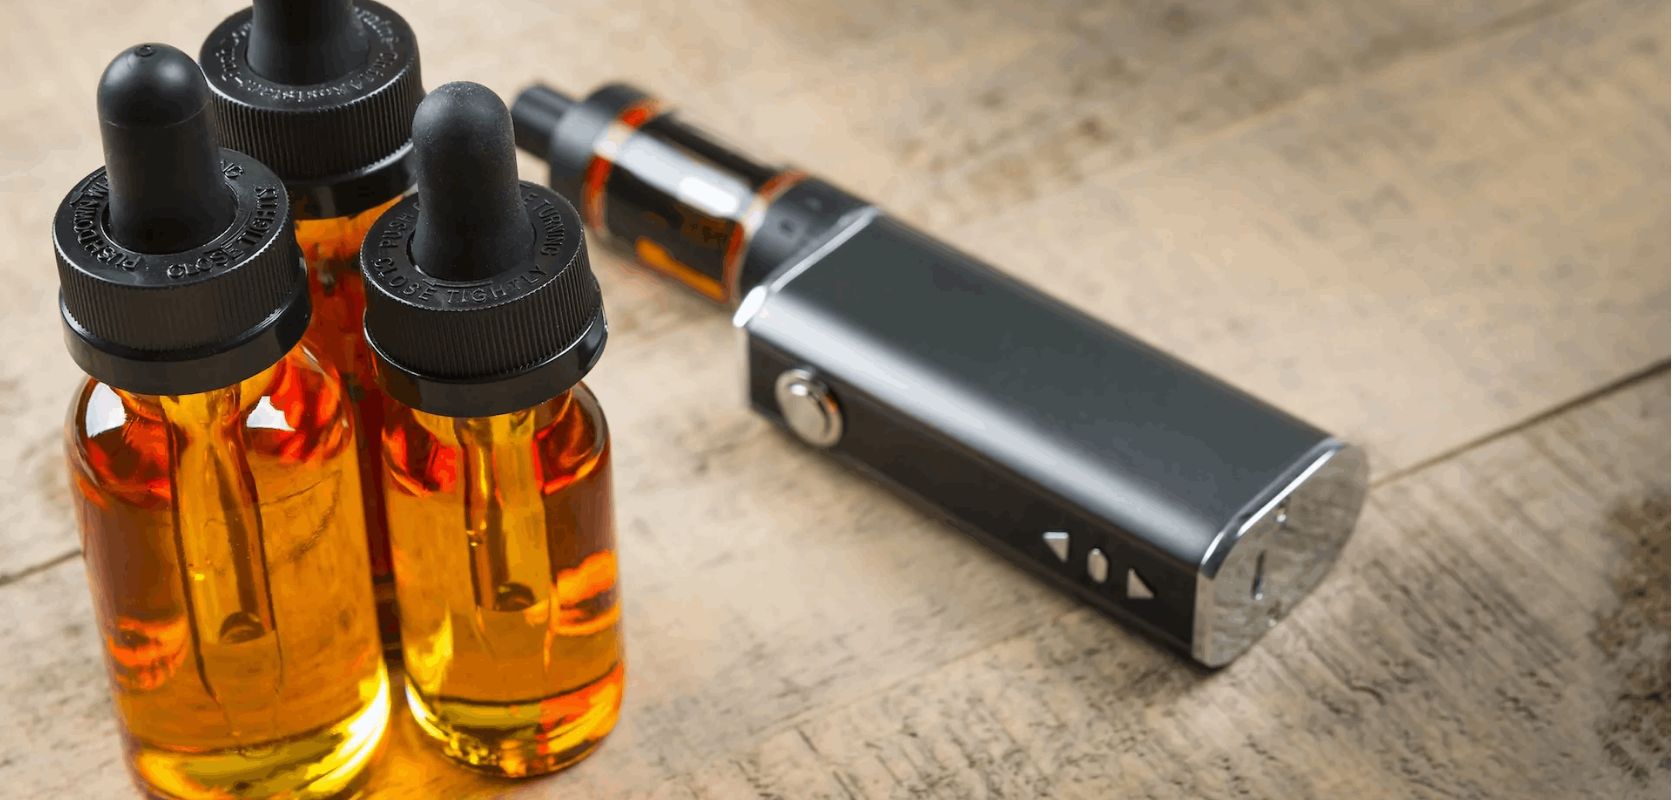 THC vape juice, also known as THC e-liquid or THC oil, is a concentrated liquid form of THC (tetrahydrocannabinol), the main psychoactive compound in cannabis plants. 